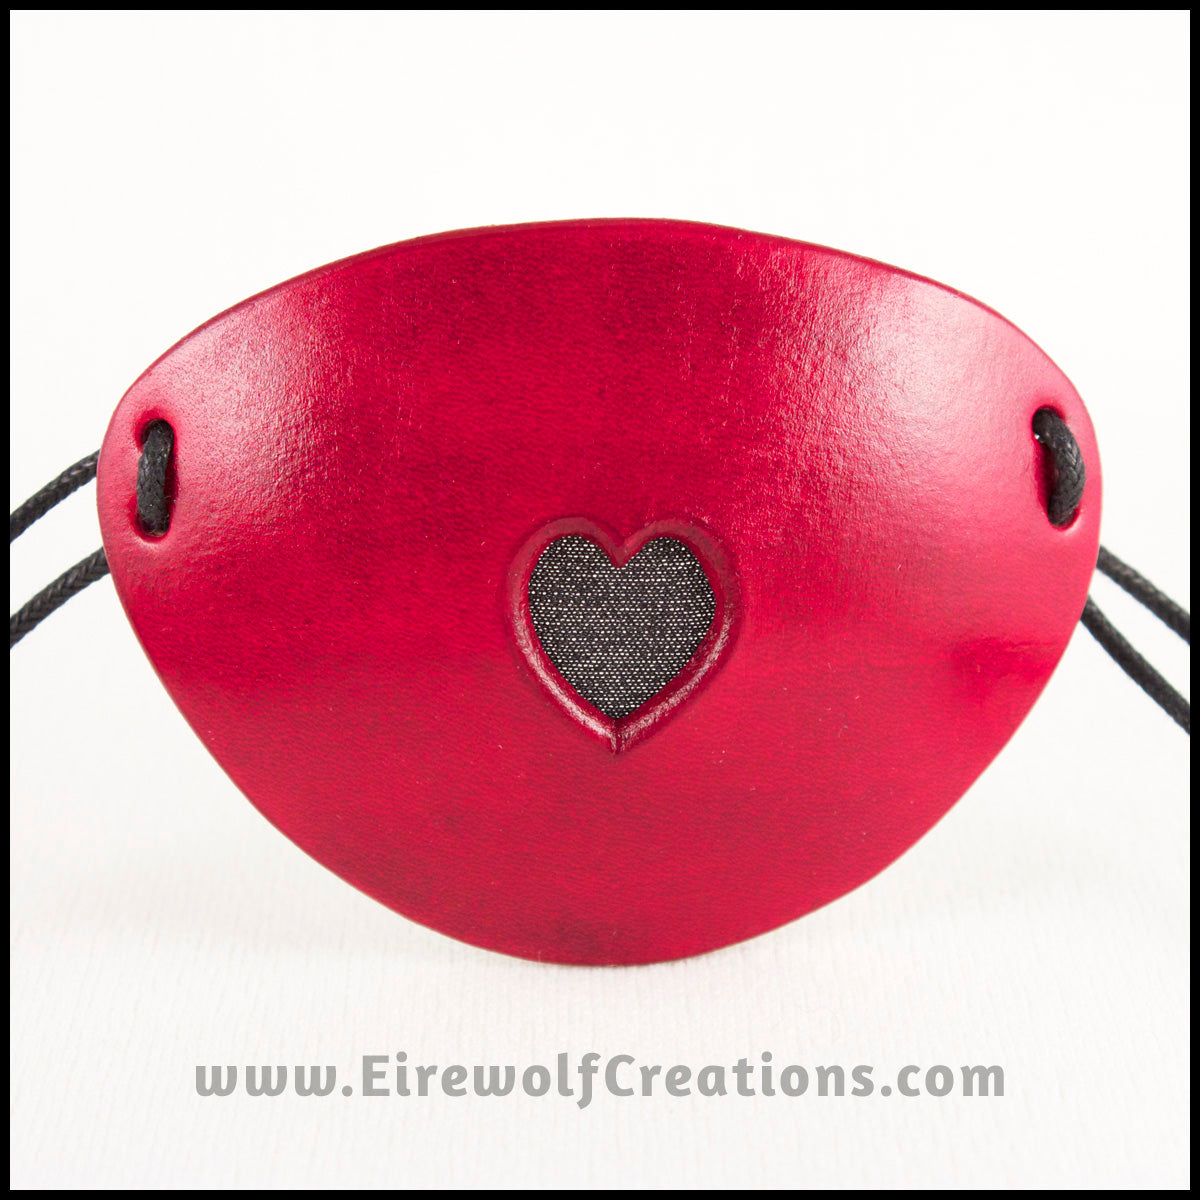 See-through Heart Red Leather Pirate Eye Patch handmade masquerade lar -  Eirewolf Creations